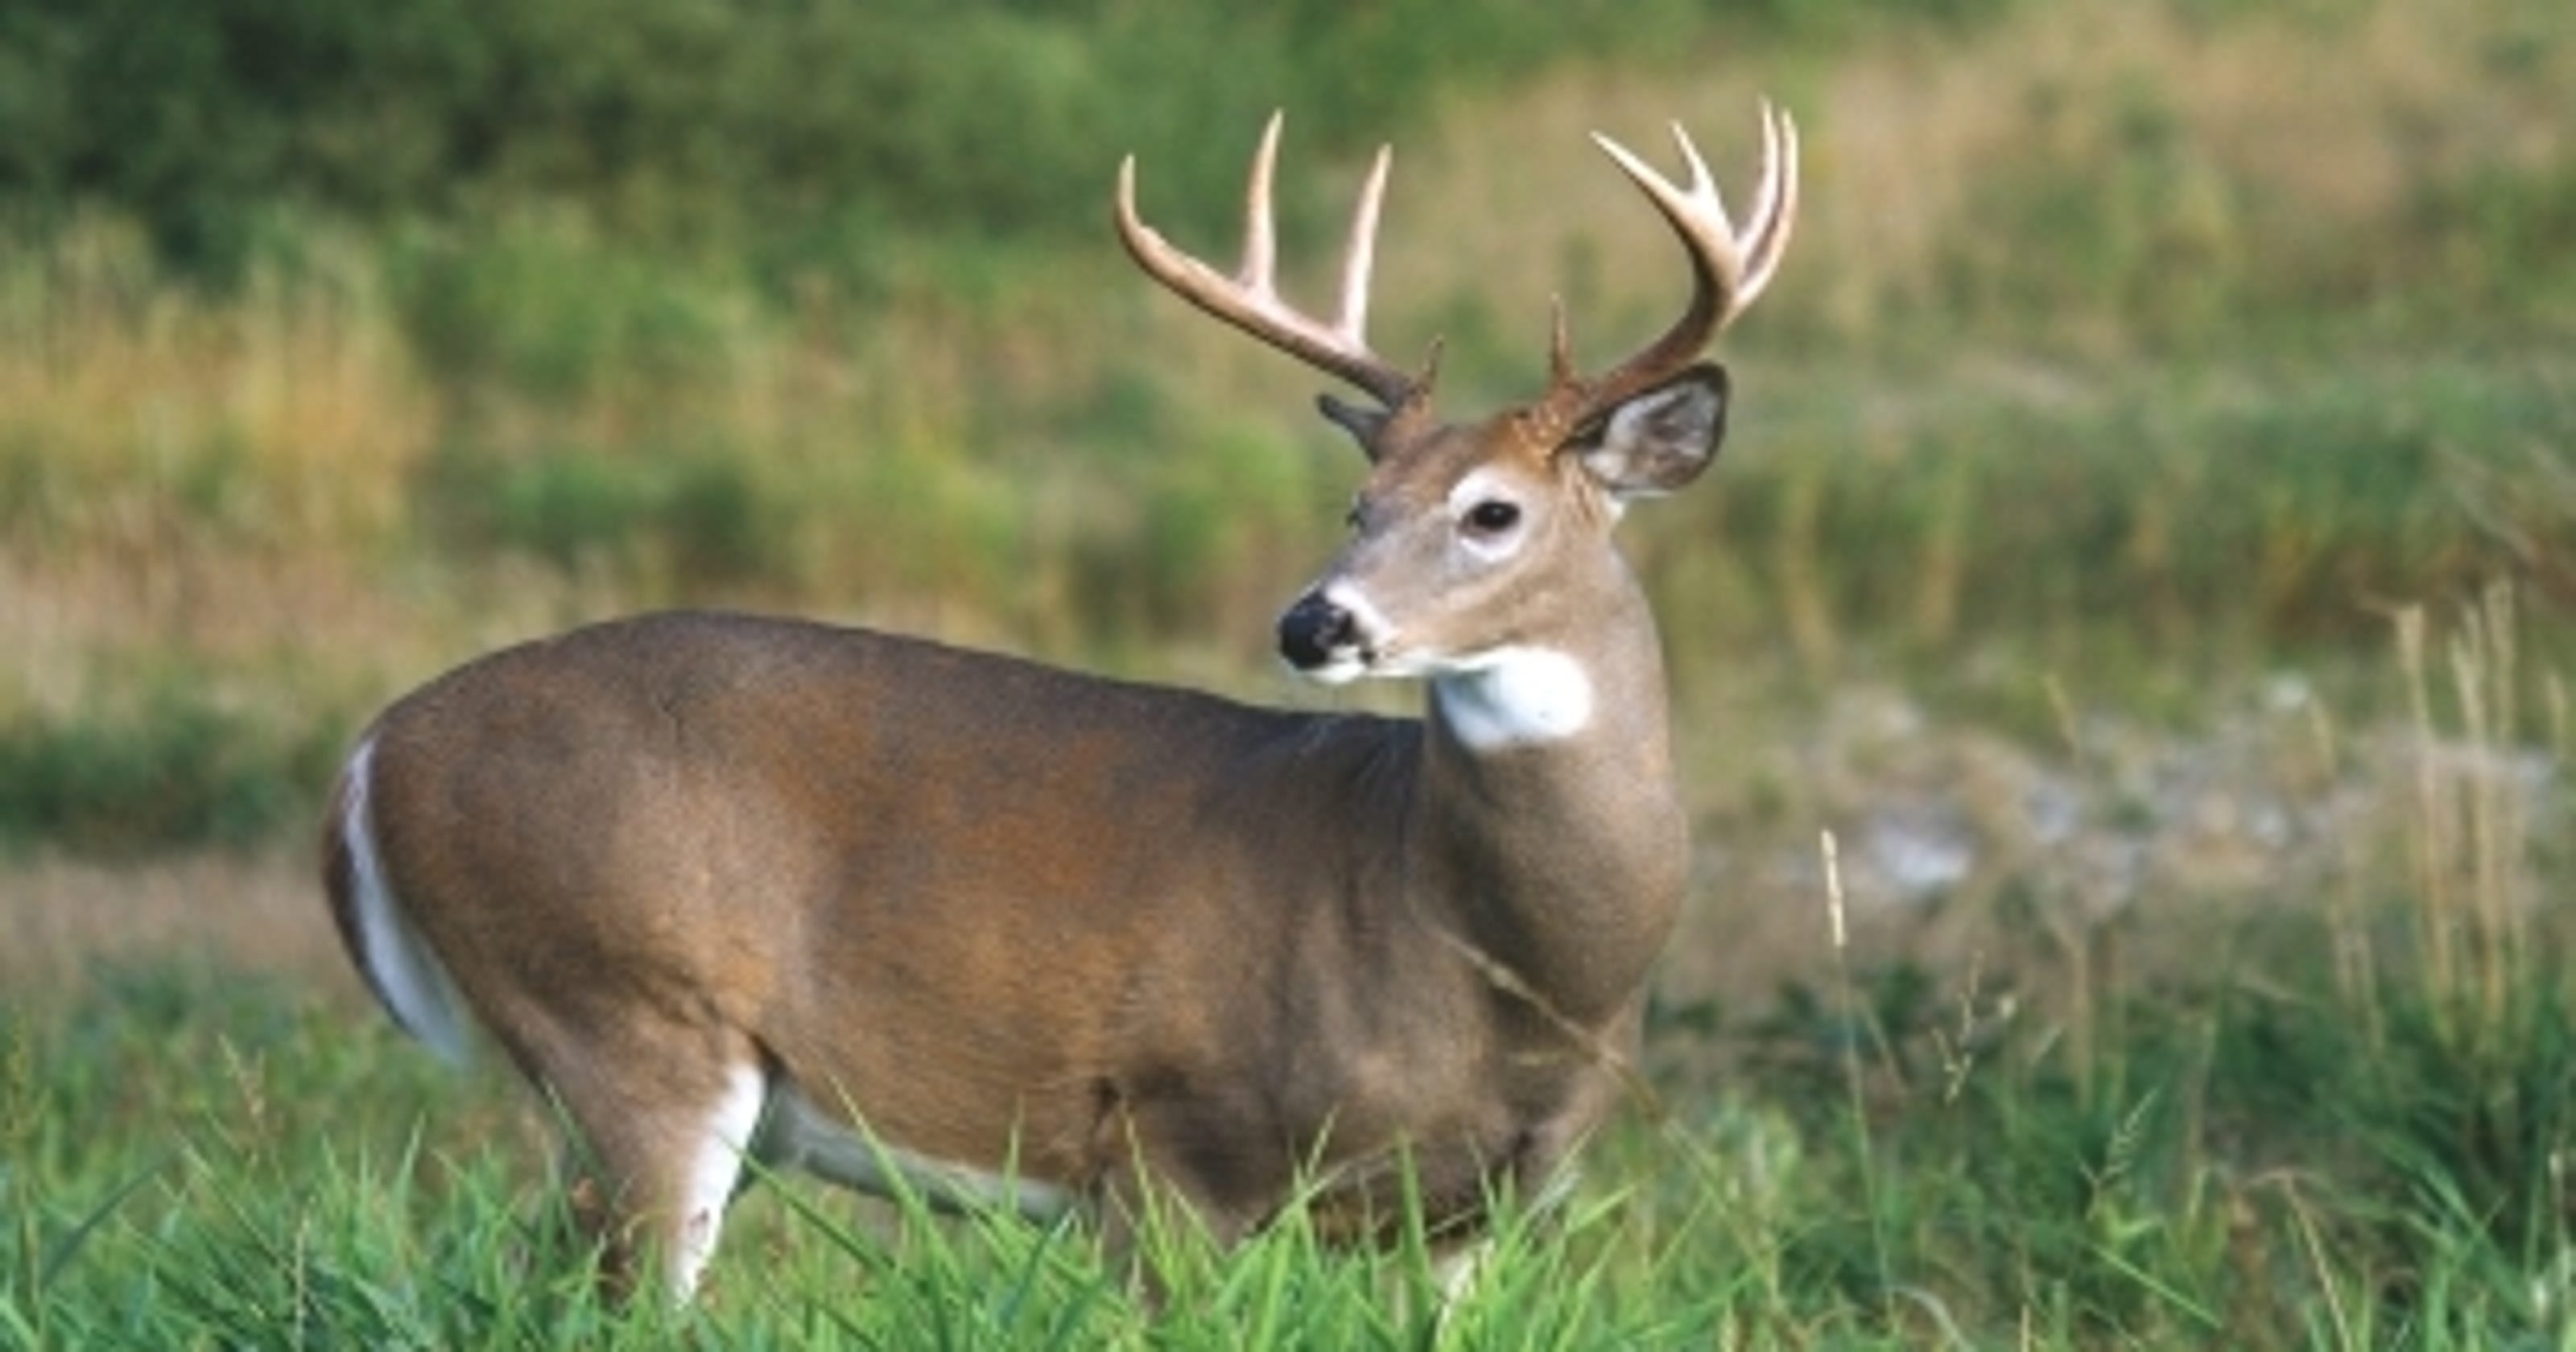 Wildlife officials hope to keep deadly disease out of Tennessee